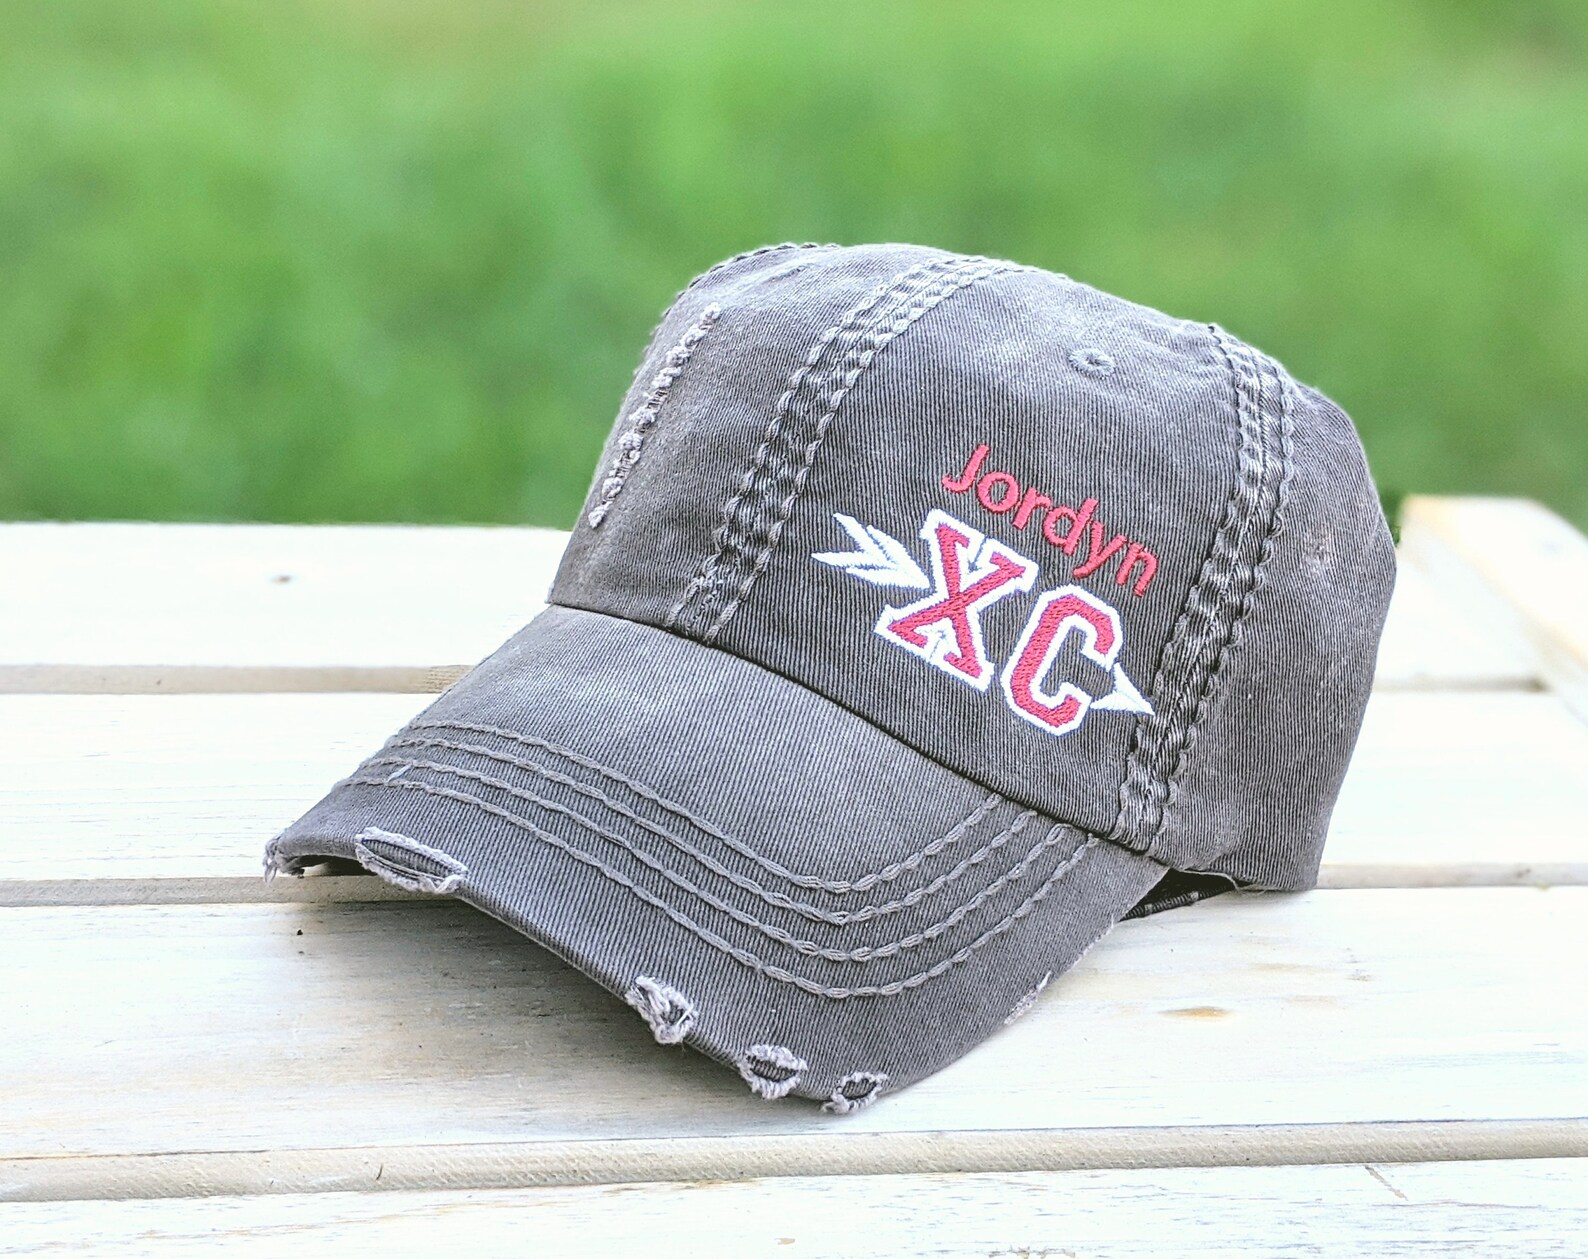 Cross country gifts like this super cute cap are fun reminders of your high school or college varsity team.